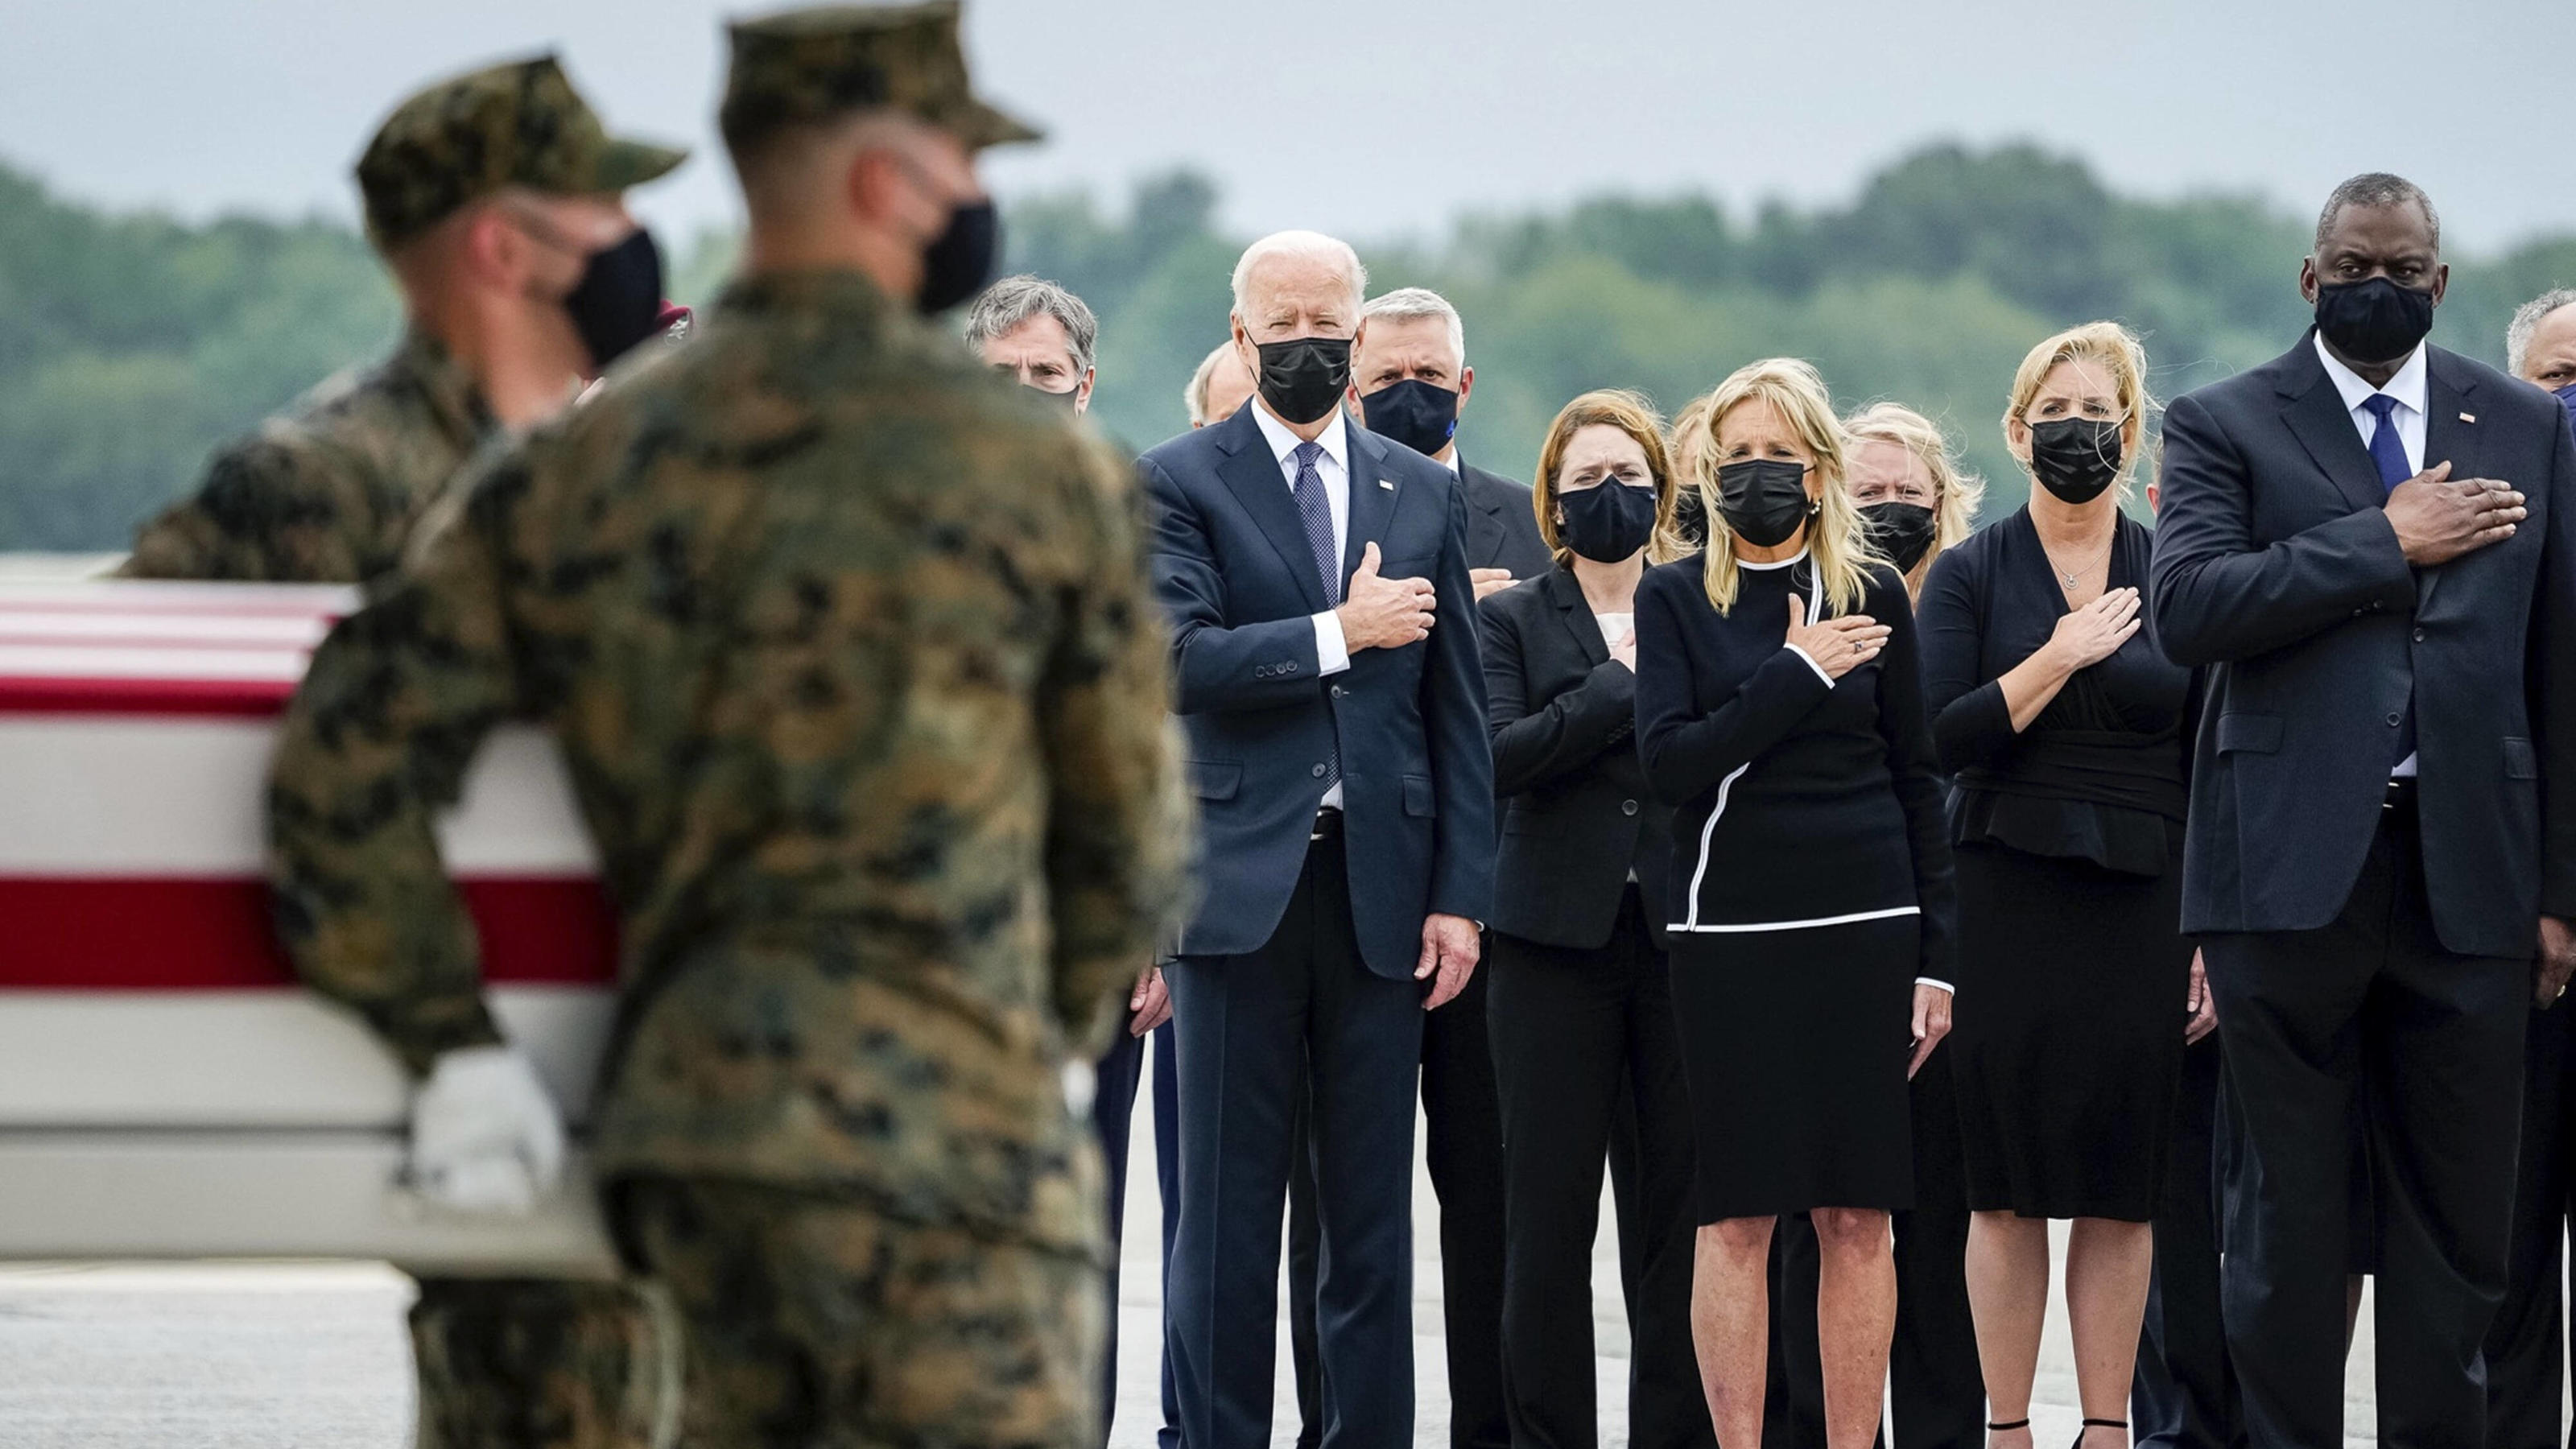  STYLELOCATIONU.S President Joe Biden, First Lady Jill Biden and Defense Secretary Lloyd Austin III salute during the transfers of the remains service members killed in Kabul at Dover Air Force Base August 29, 2021 in Dover, Delaware. The remains of 